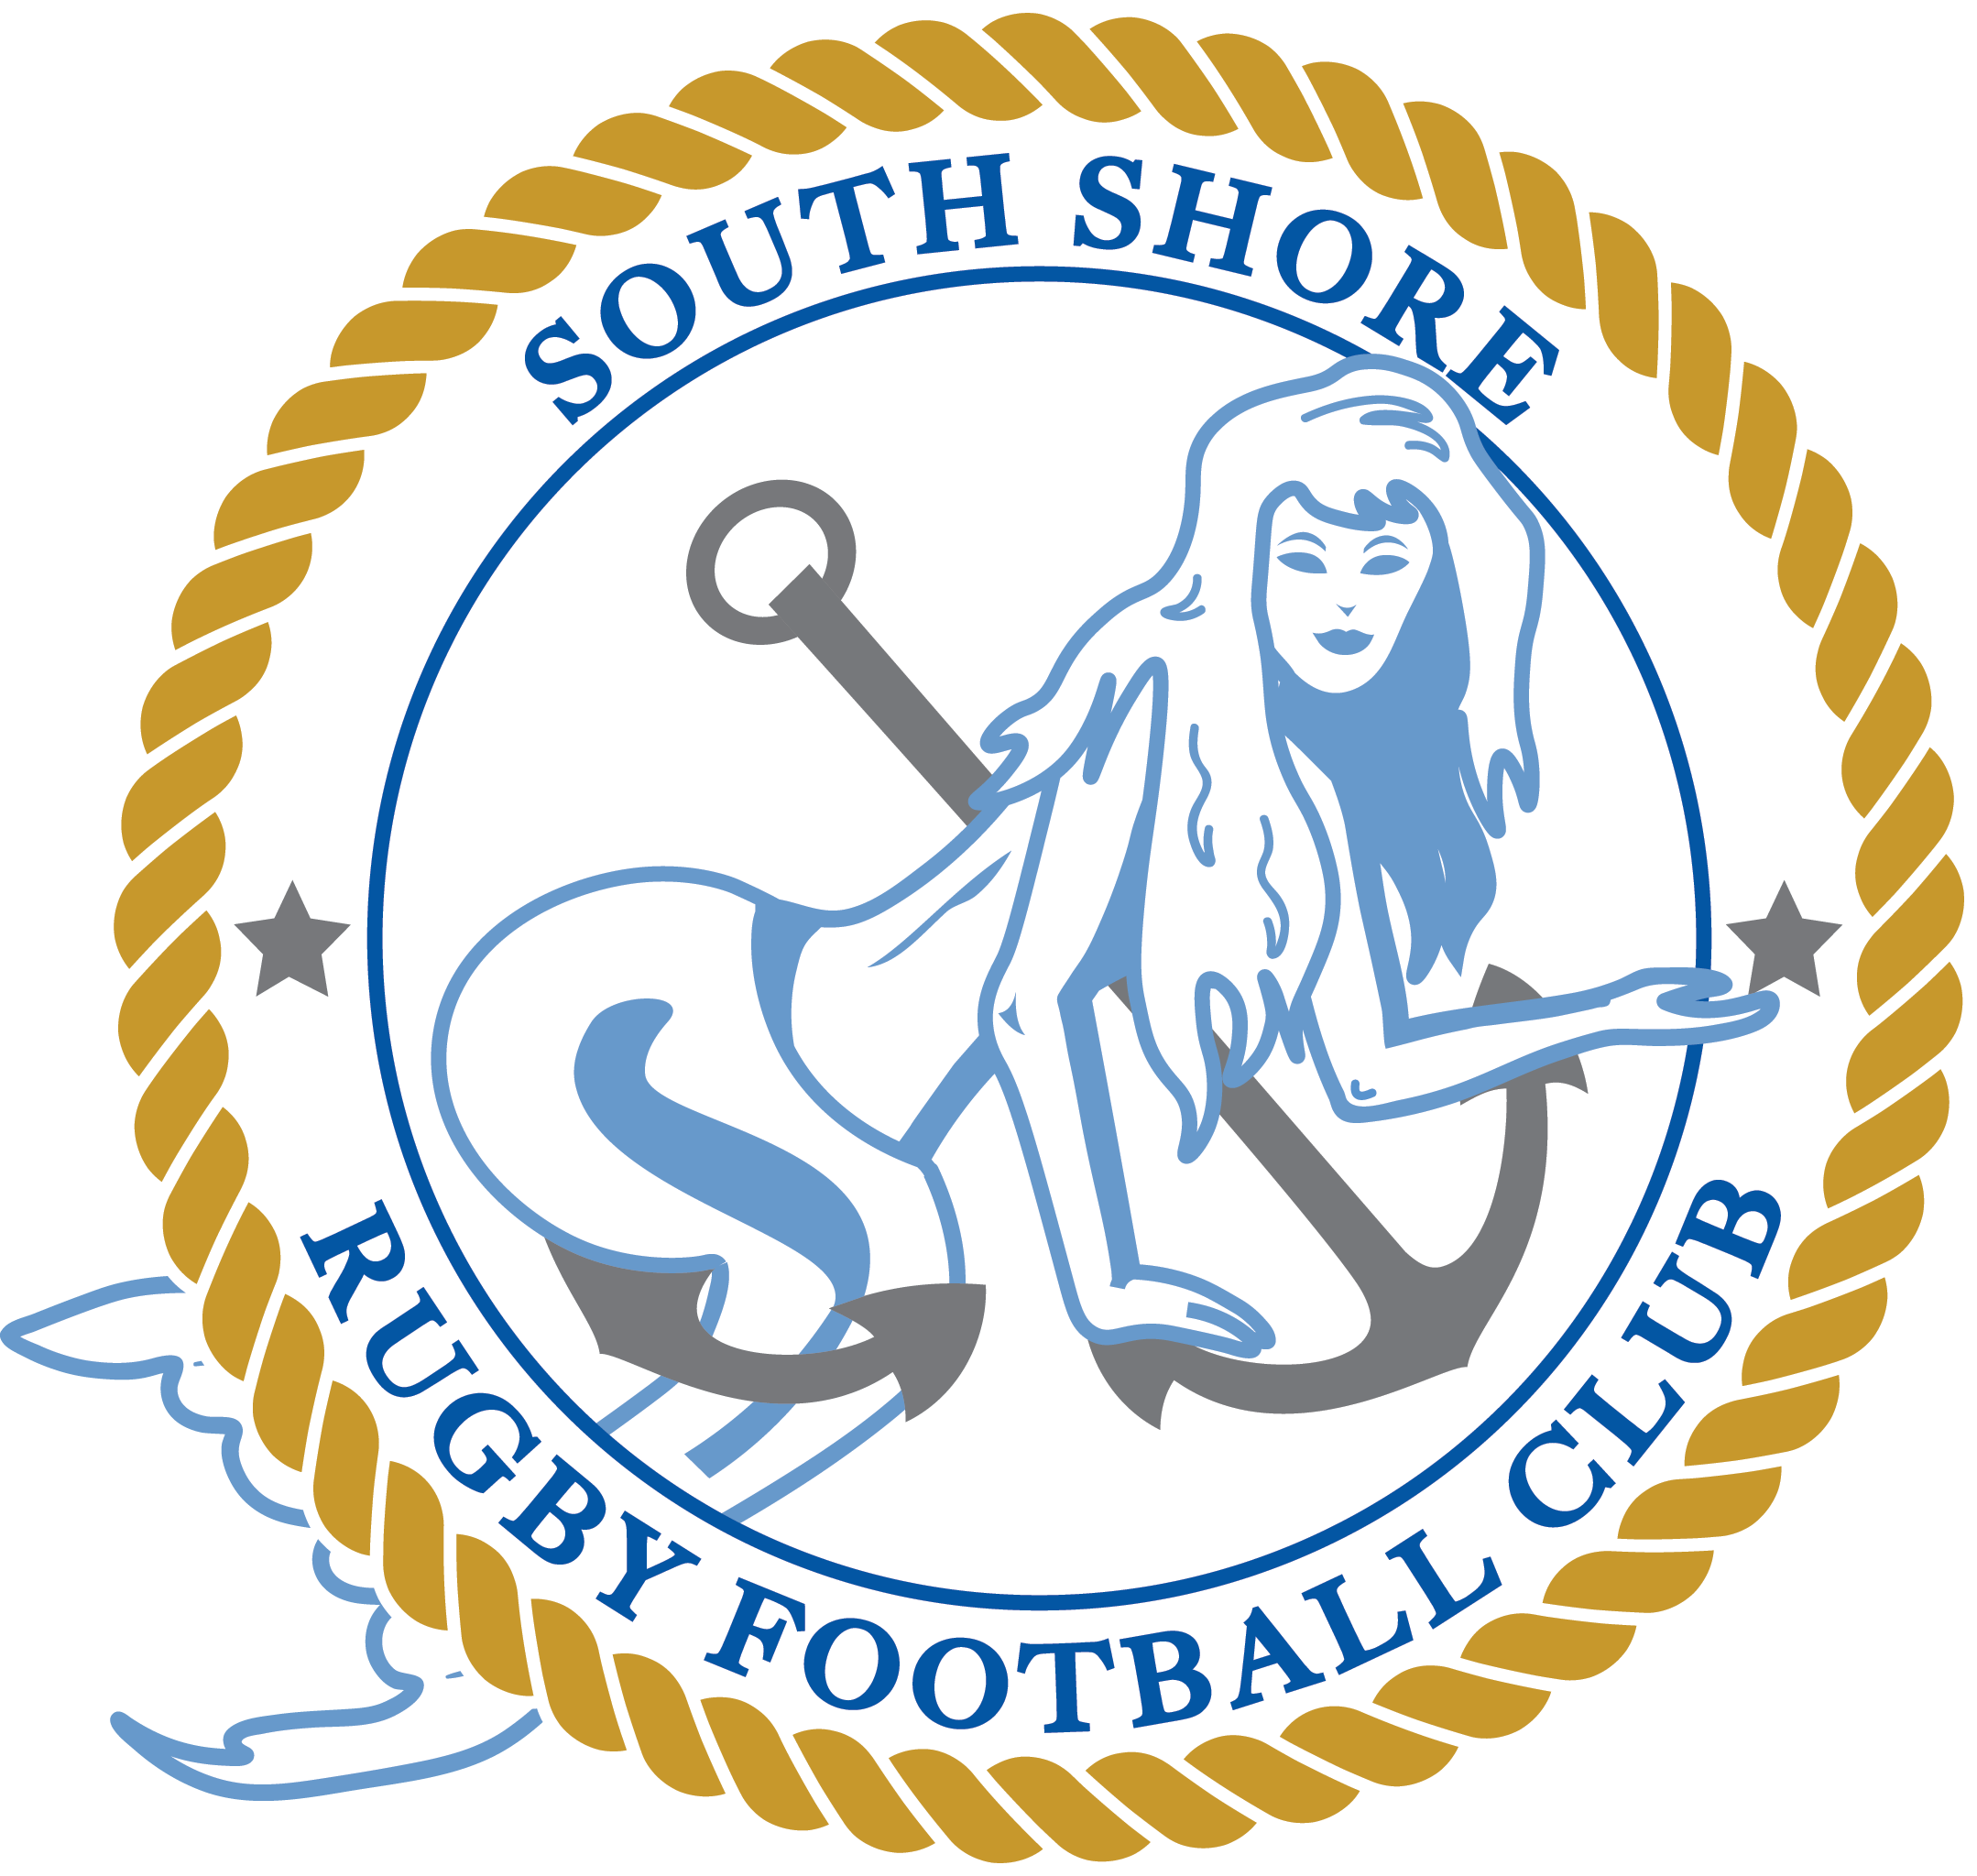 South Shore Rugby Football Club